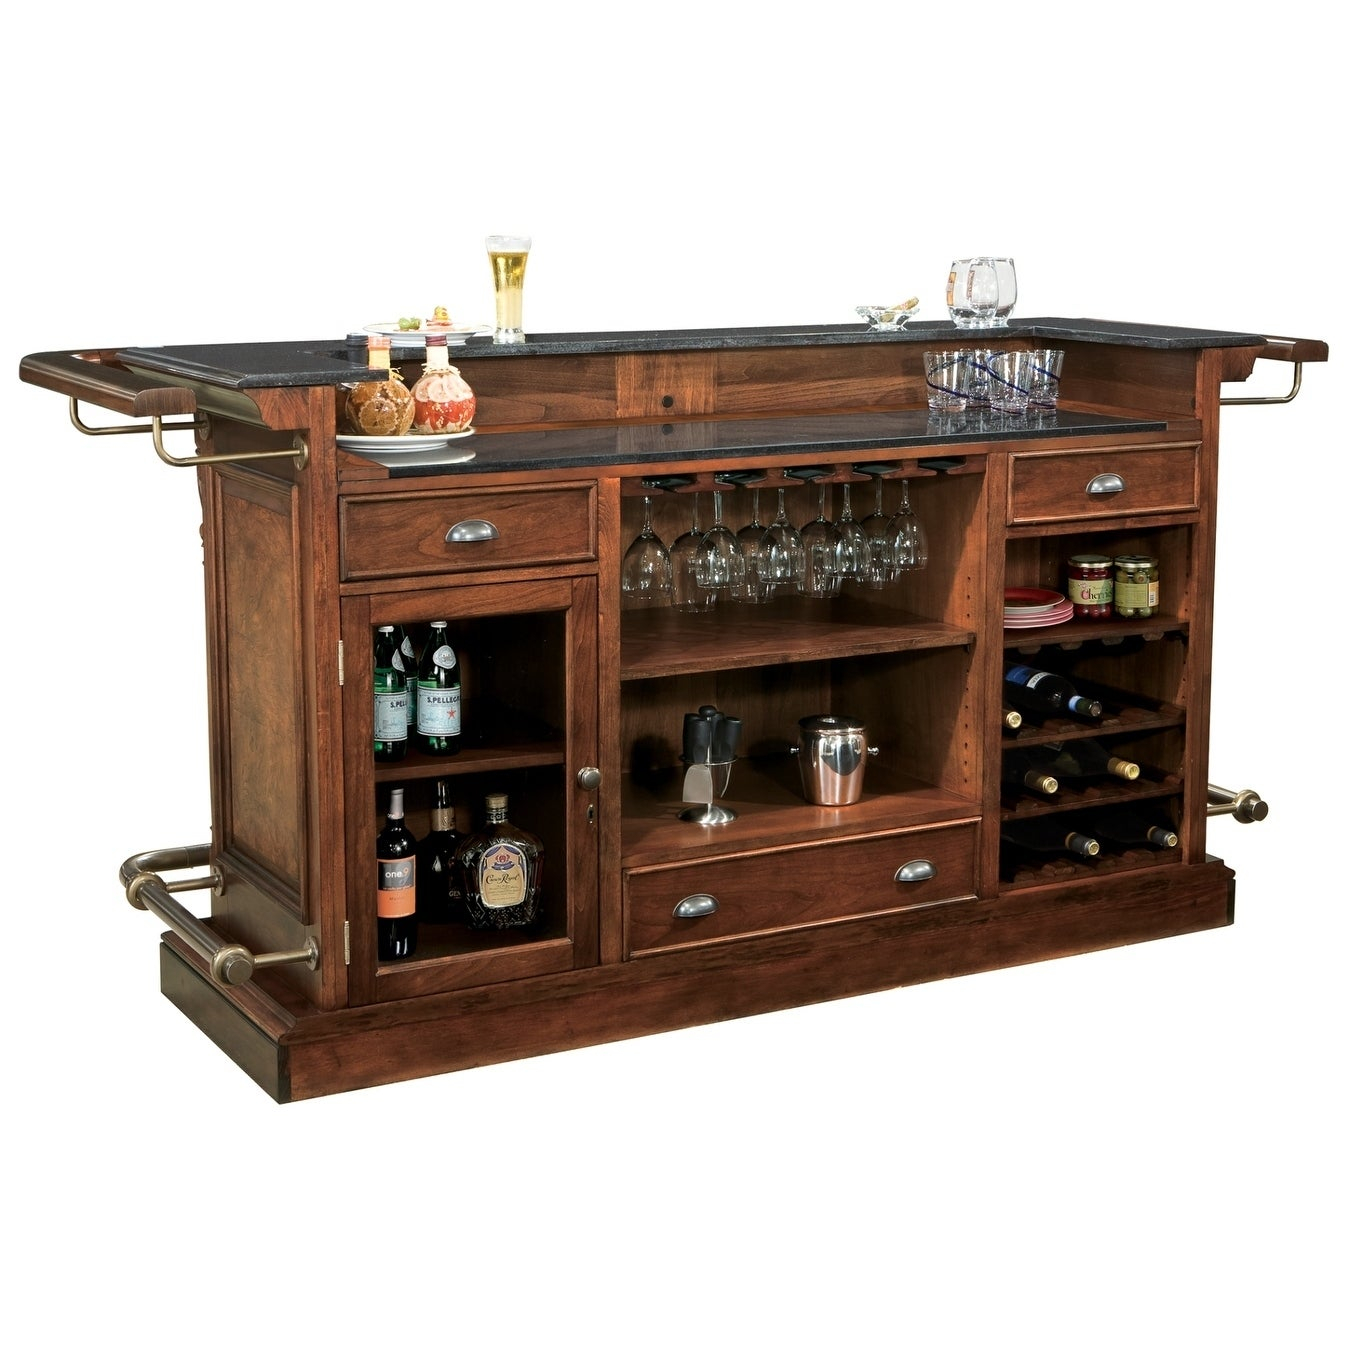 Howard Miller Cheers Bar Vintage Old Fashioned Charming Style Liquor Or Wine Cabinet Pub Storage With Foot Rails Na for dimensions 1349 X 1349